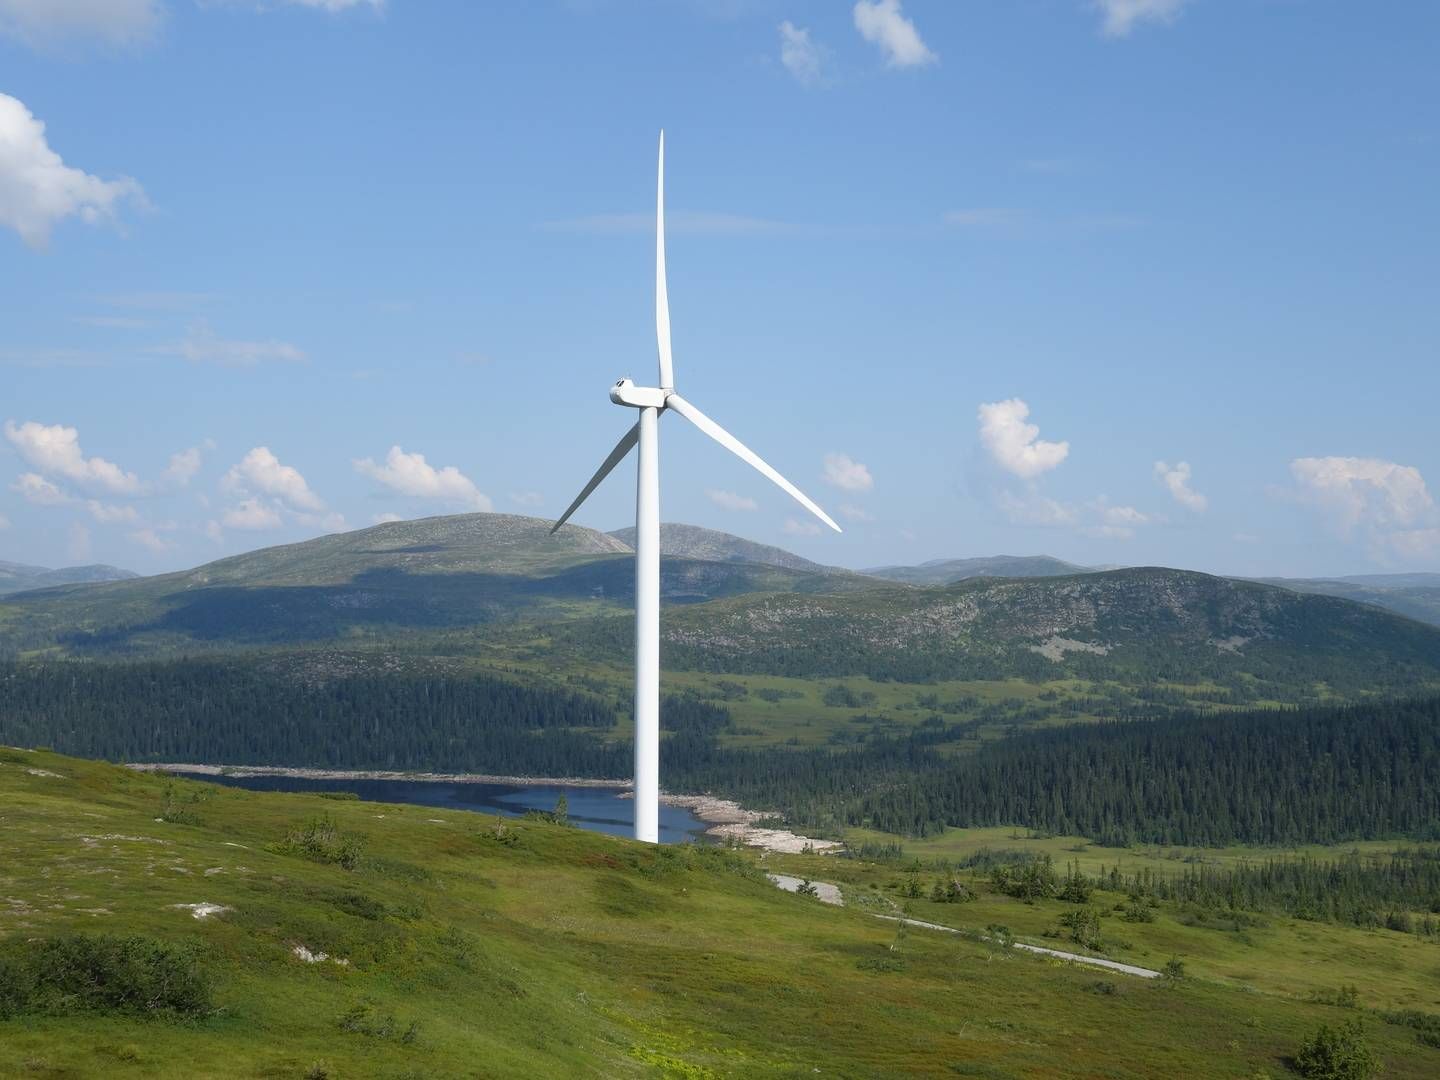 Storrun Windkraft, an onshore wind farm located in Sweden’s Sundsvall area. The fund has now made three new wind farms to its portfolio. | Photo: PR / Columbia Threedneedle